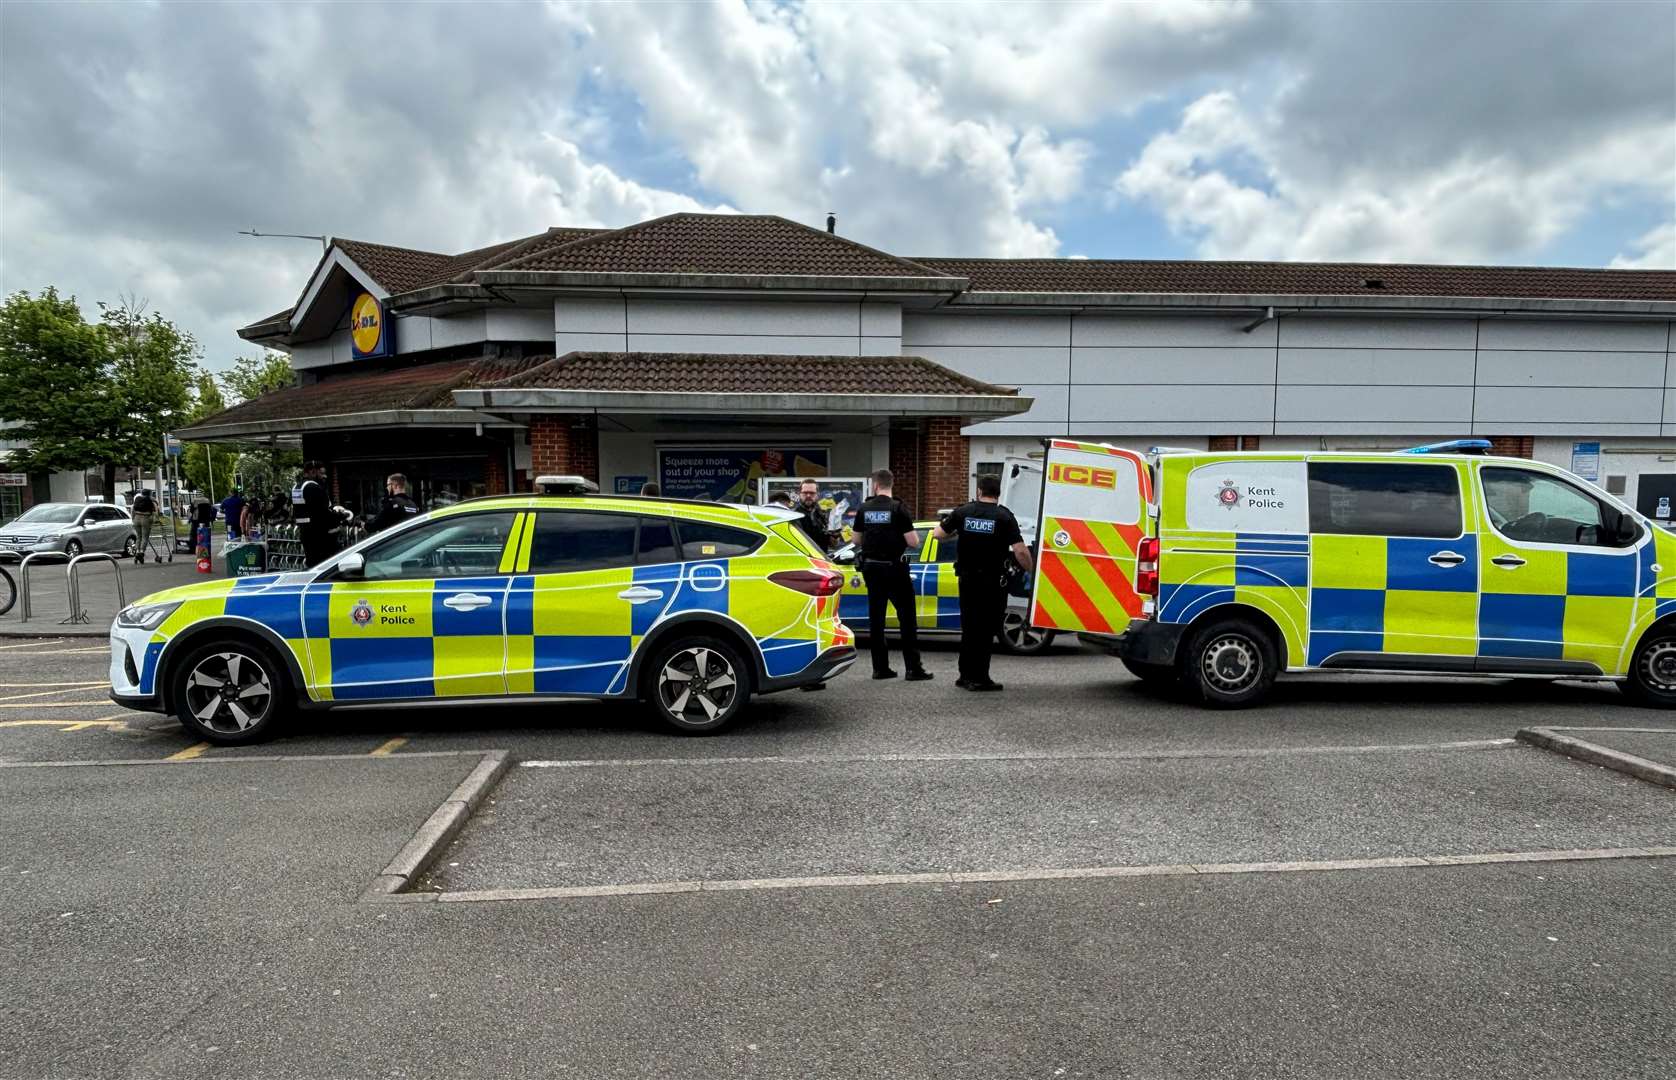 Four police cars were in attendance at Lidl in Ashford this lunchtime. Picture: Joe Harbert